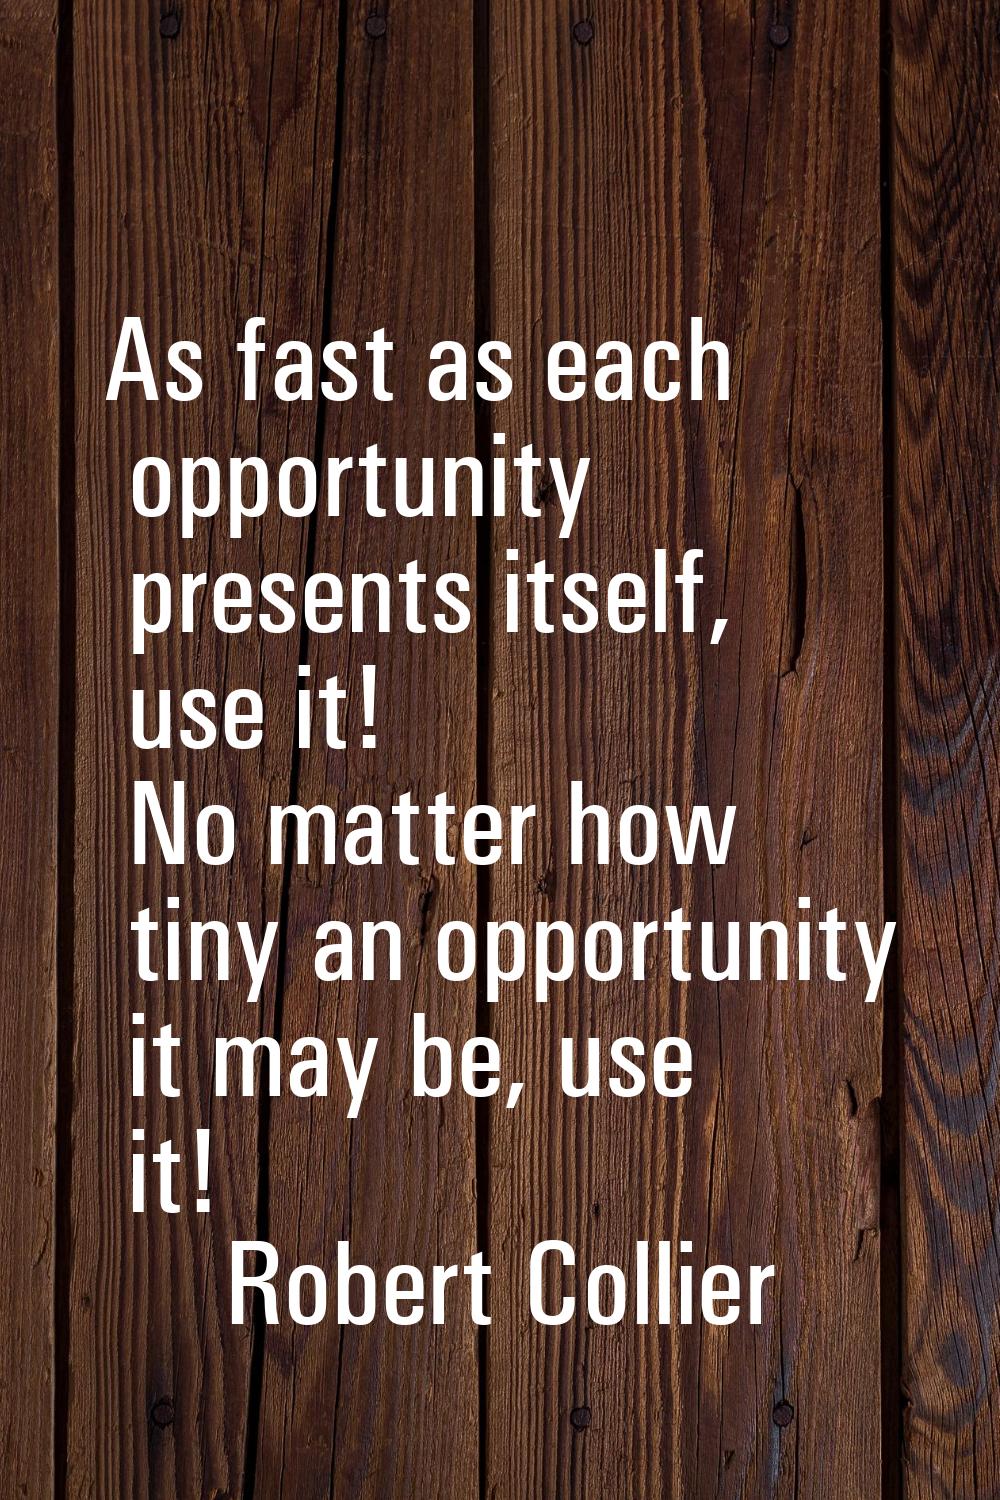 As fast as each opportunity presents itself, use it! No matter how tiny an opportunity it may be, u